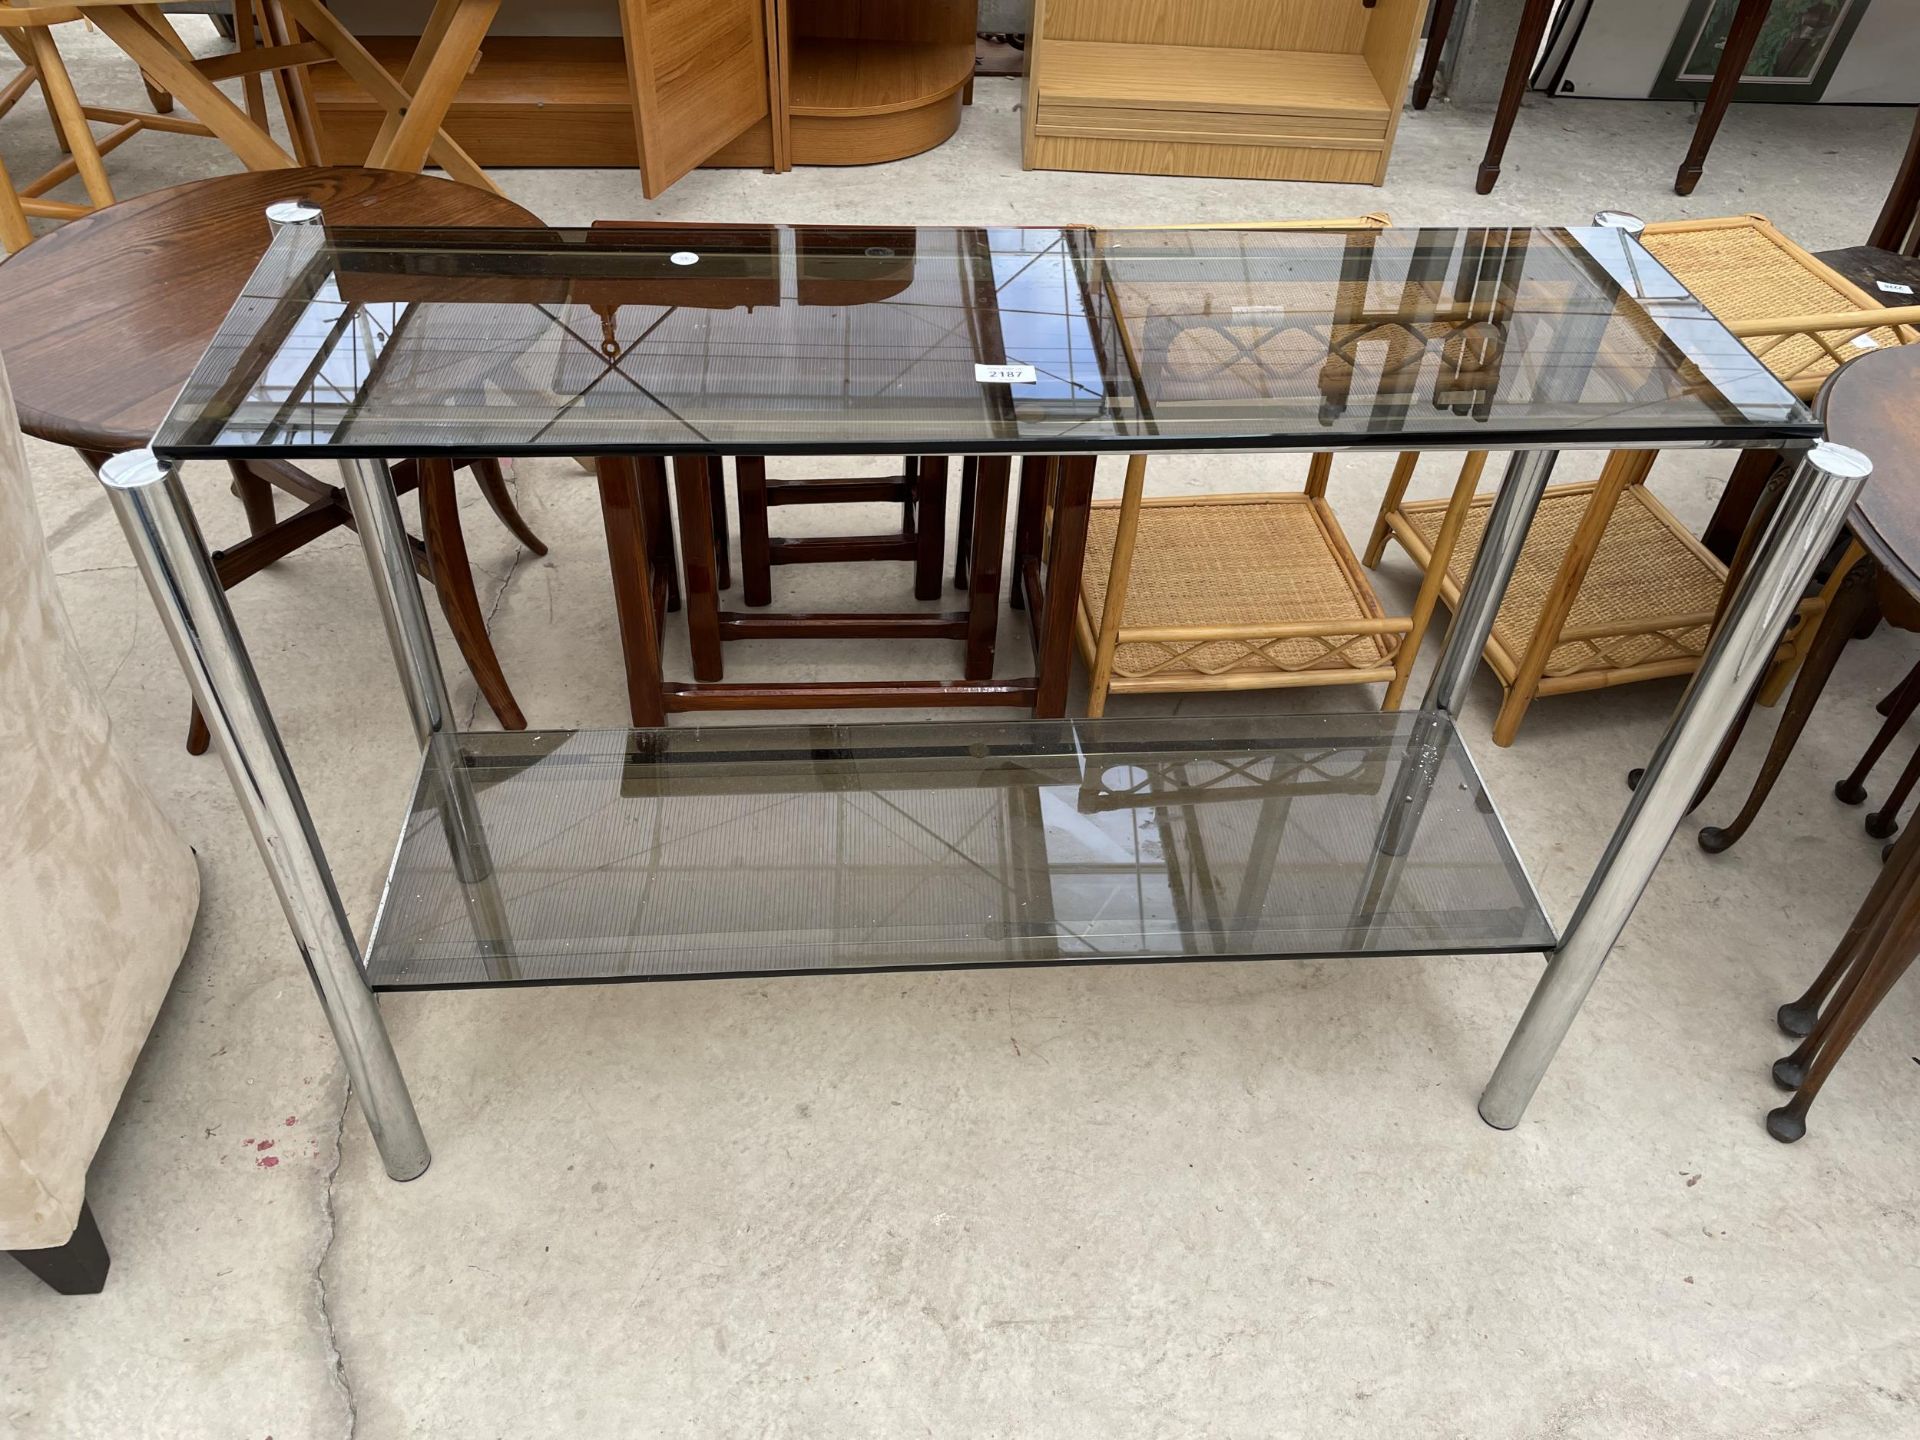 A MODERN TWO TIER CONSOLE TABLE WITH GLASS SHELVES, 41" WIDE